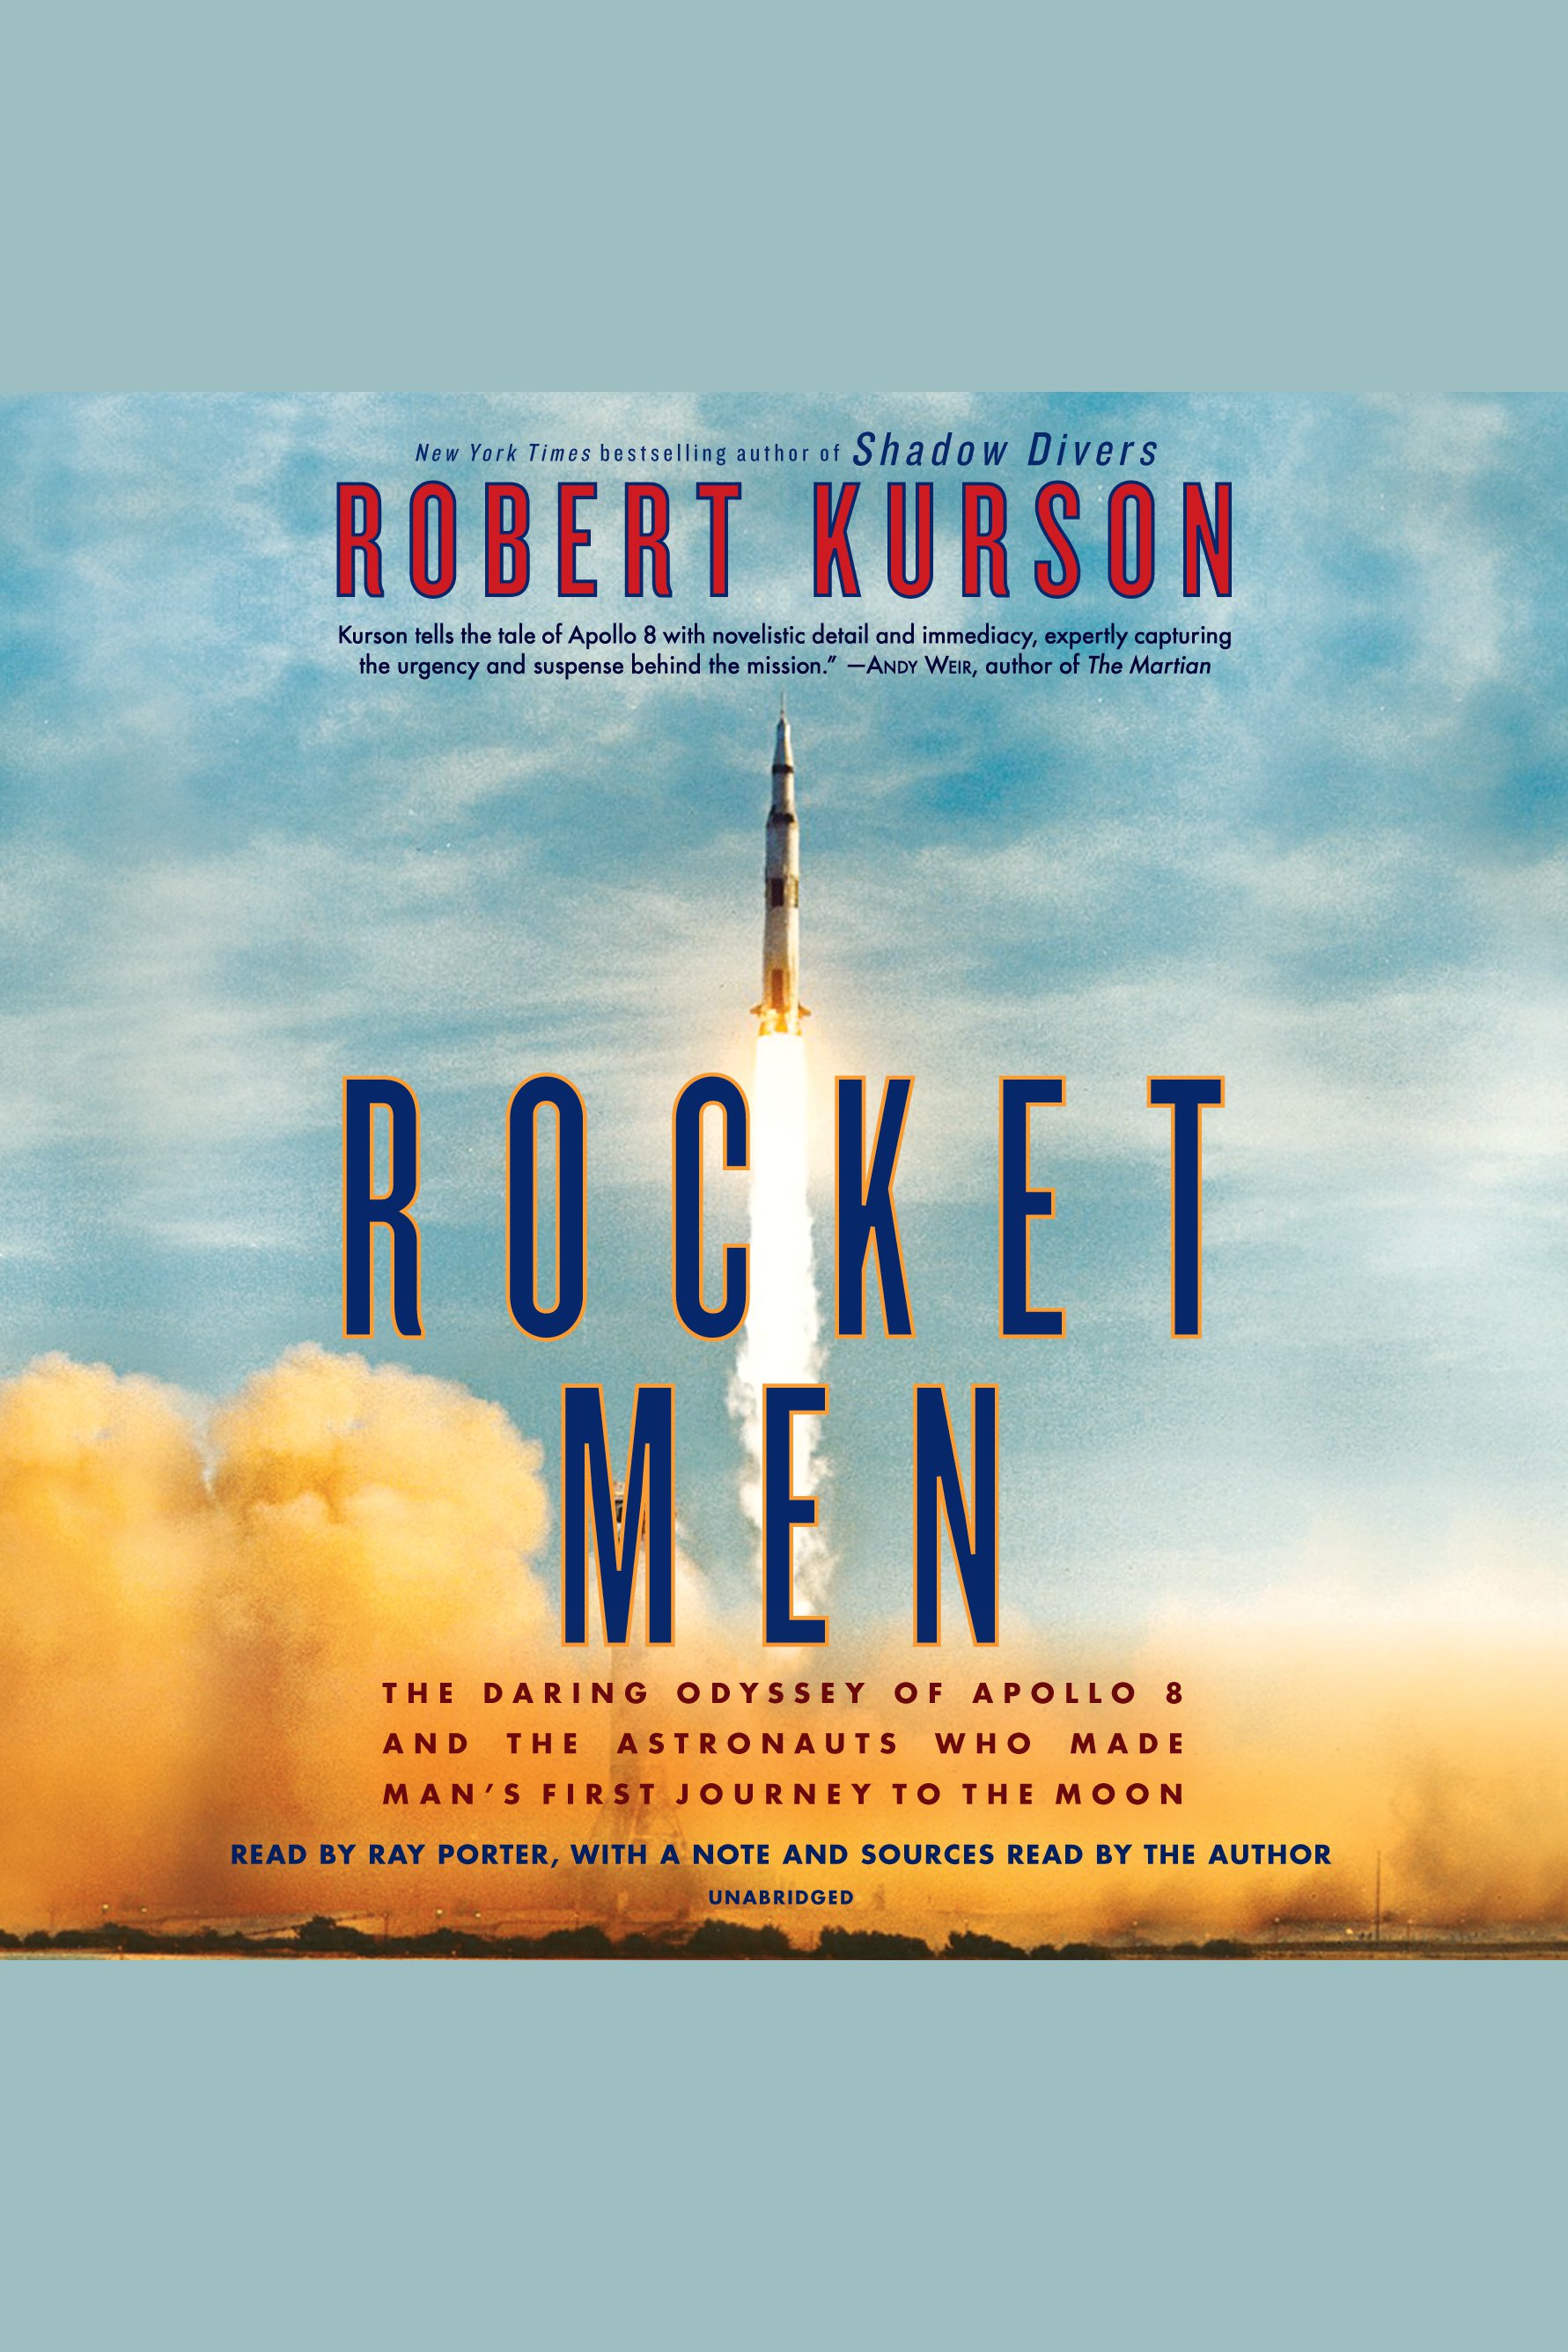 Rocket Men the daring odyssey of Apollo 8 and the astronauts who made man's first journey to the Moon cover image